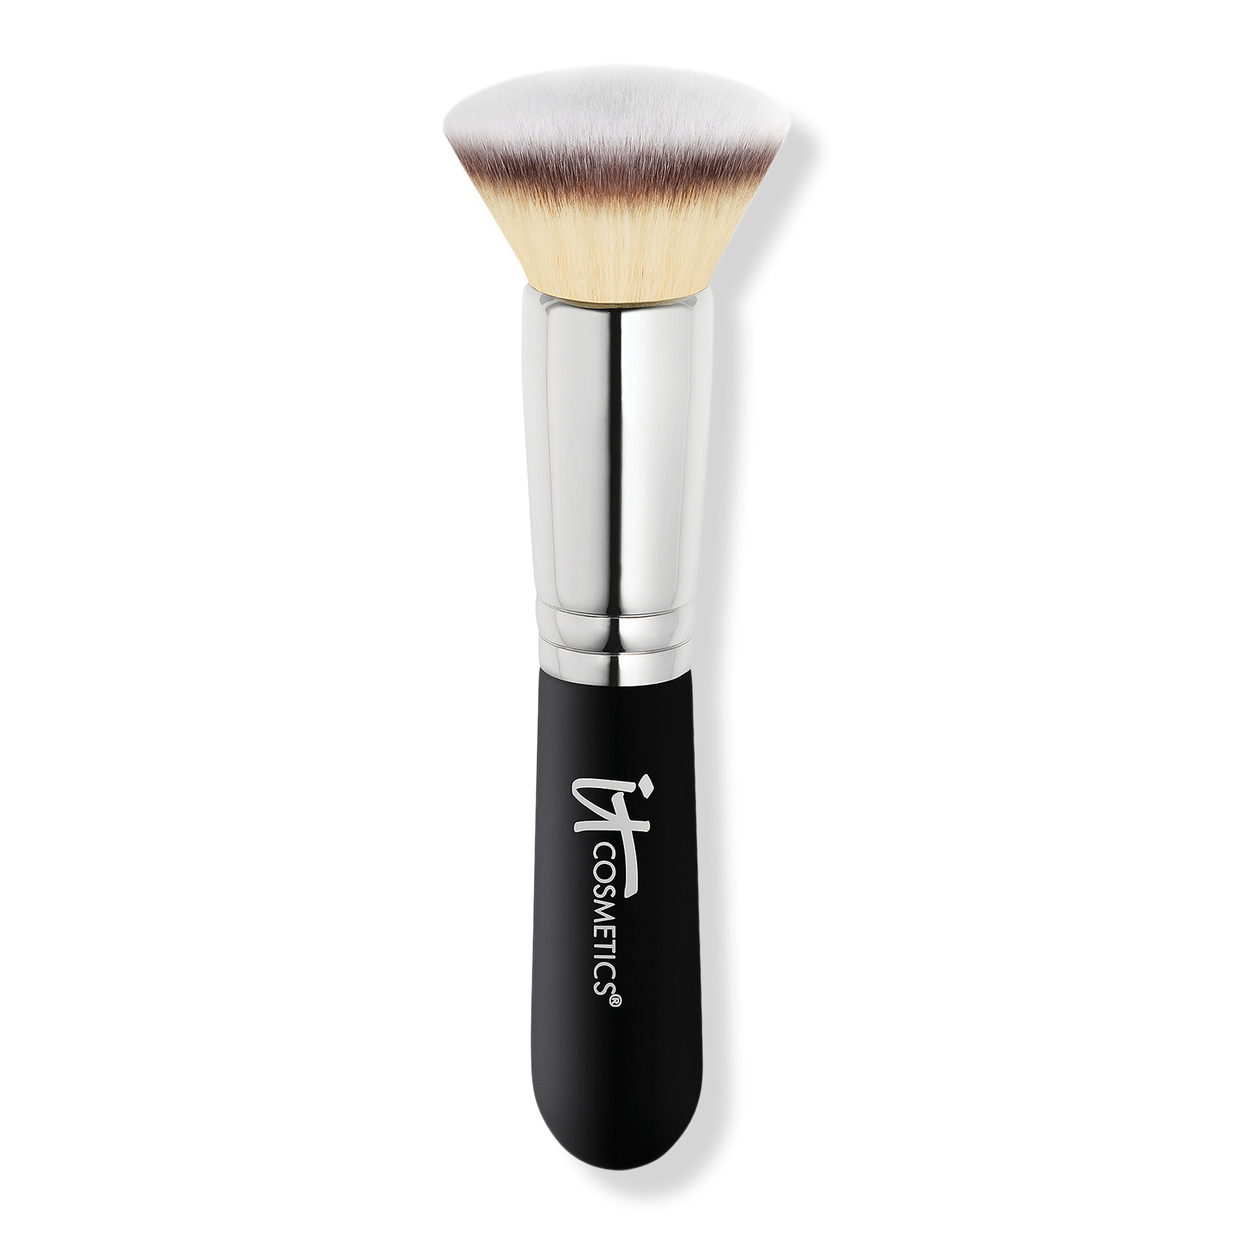 Heavenly Luxe Flat Top Buffing Foundation Brush #6 - IT Cosmetics